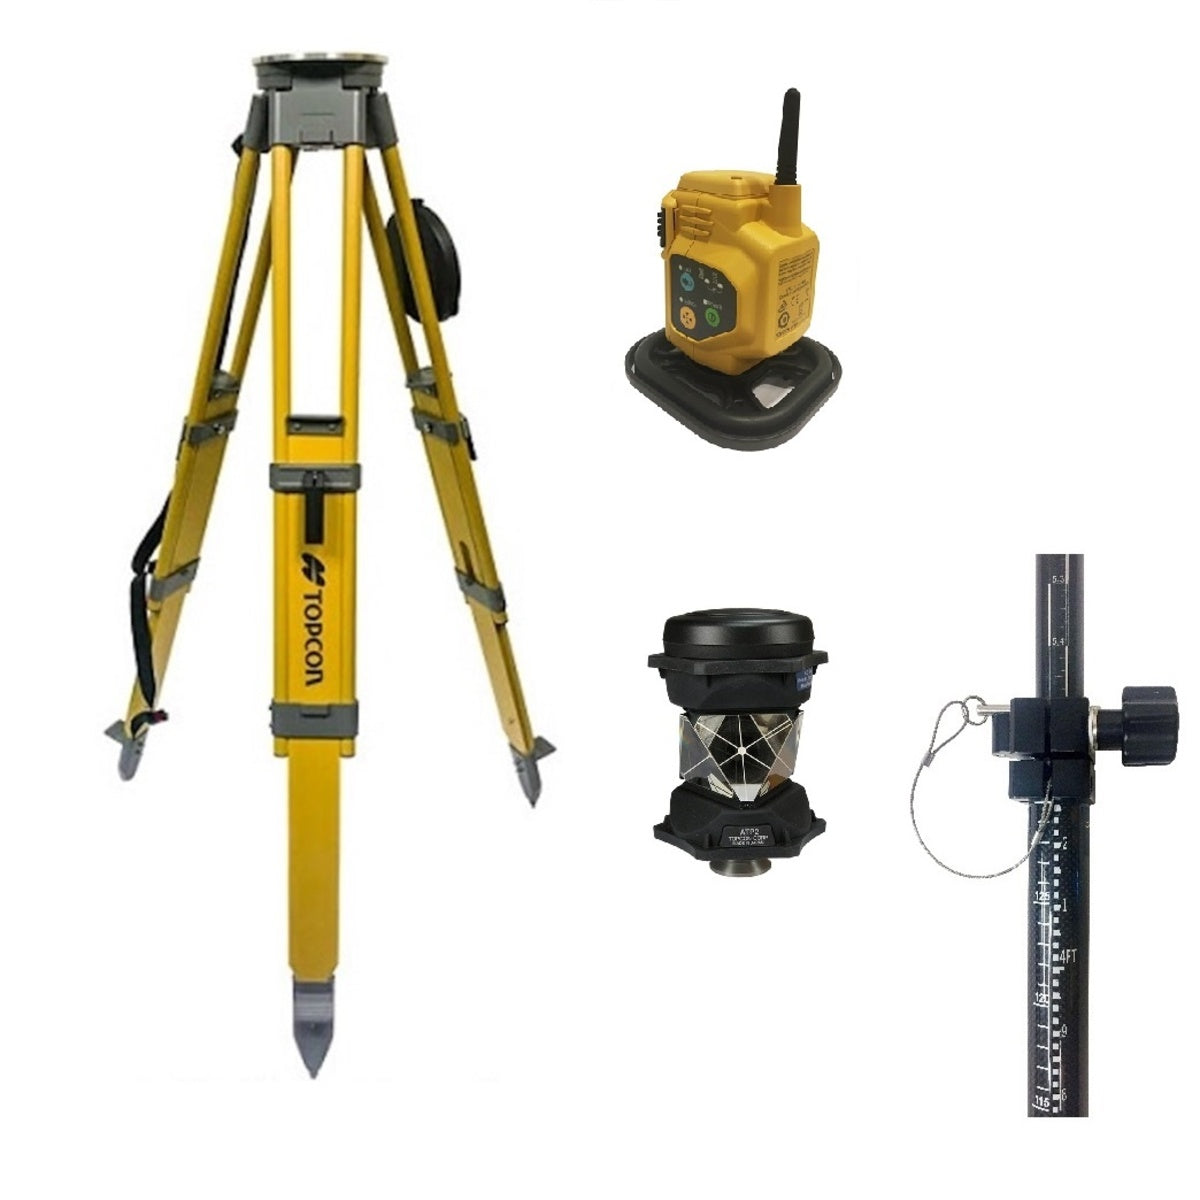 Topcon Robotic Total Station Kit For Construction (RC-5A Quick Find) - 1001234-01